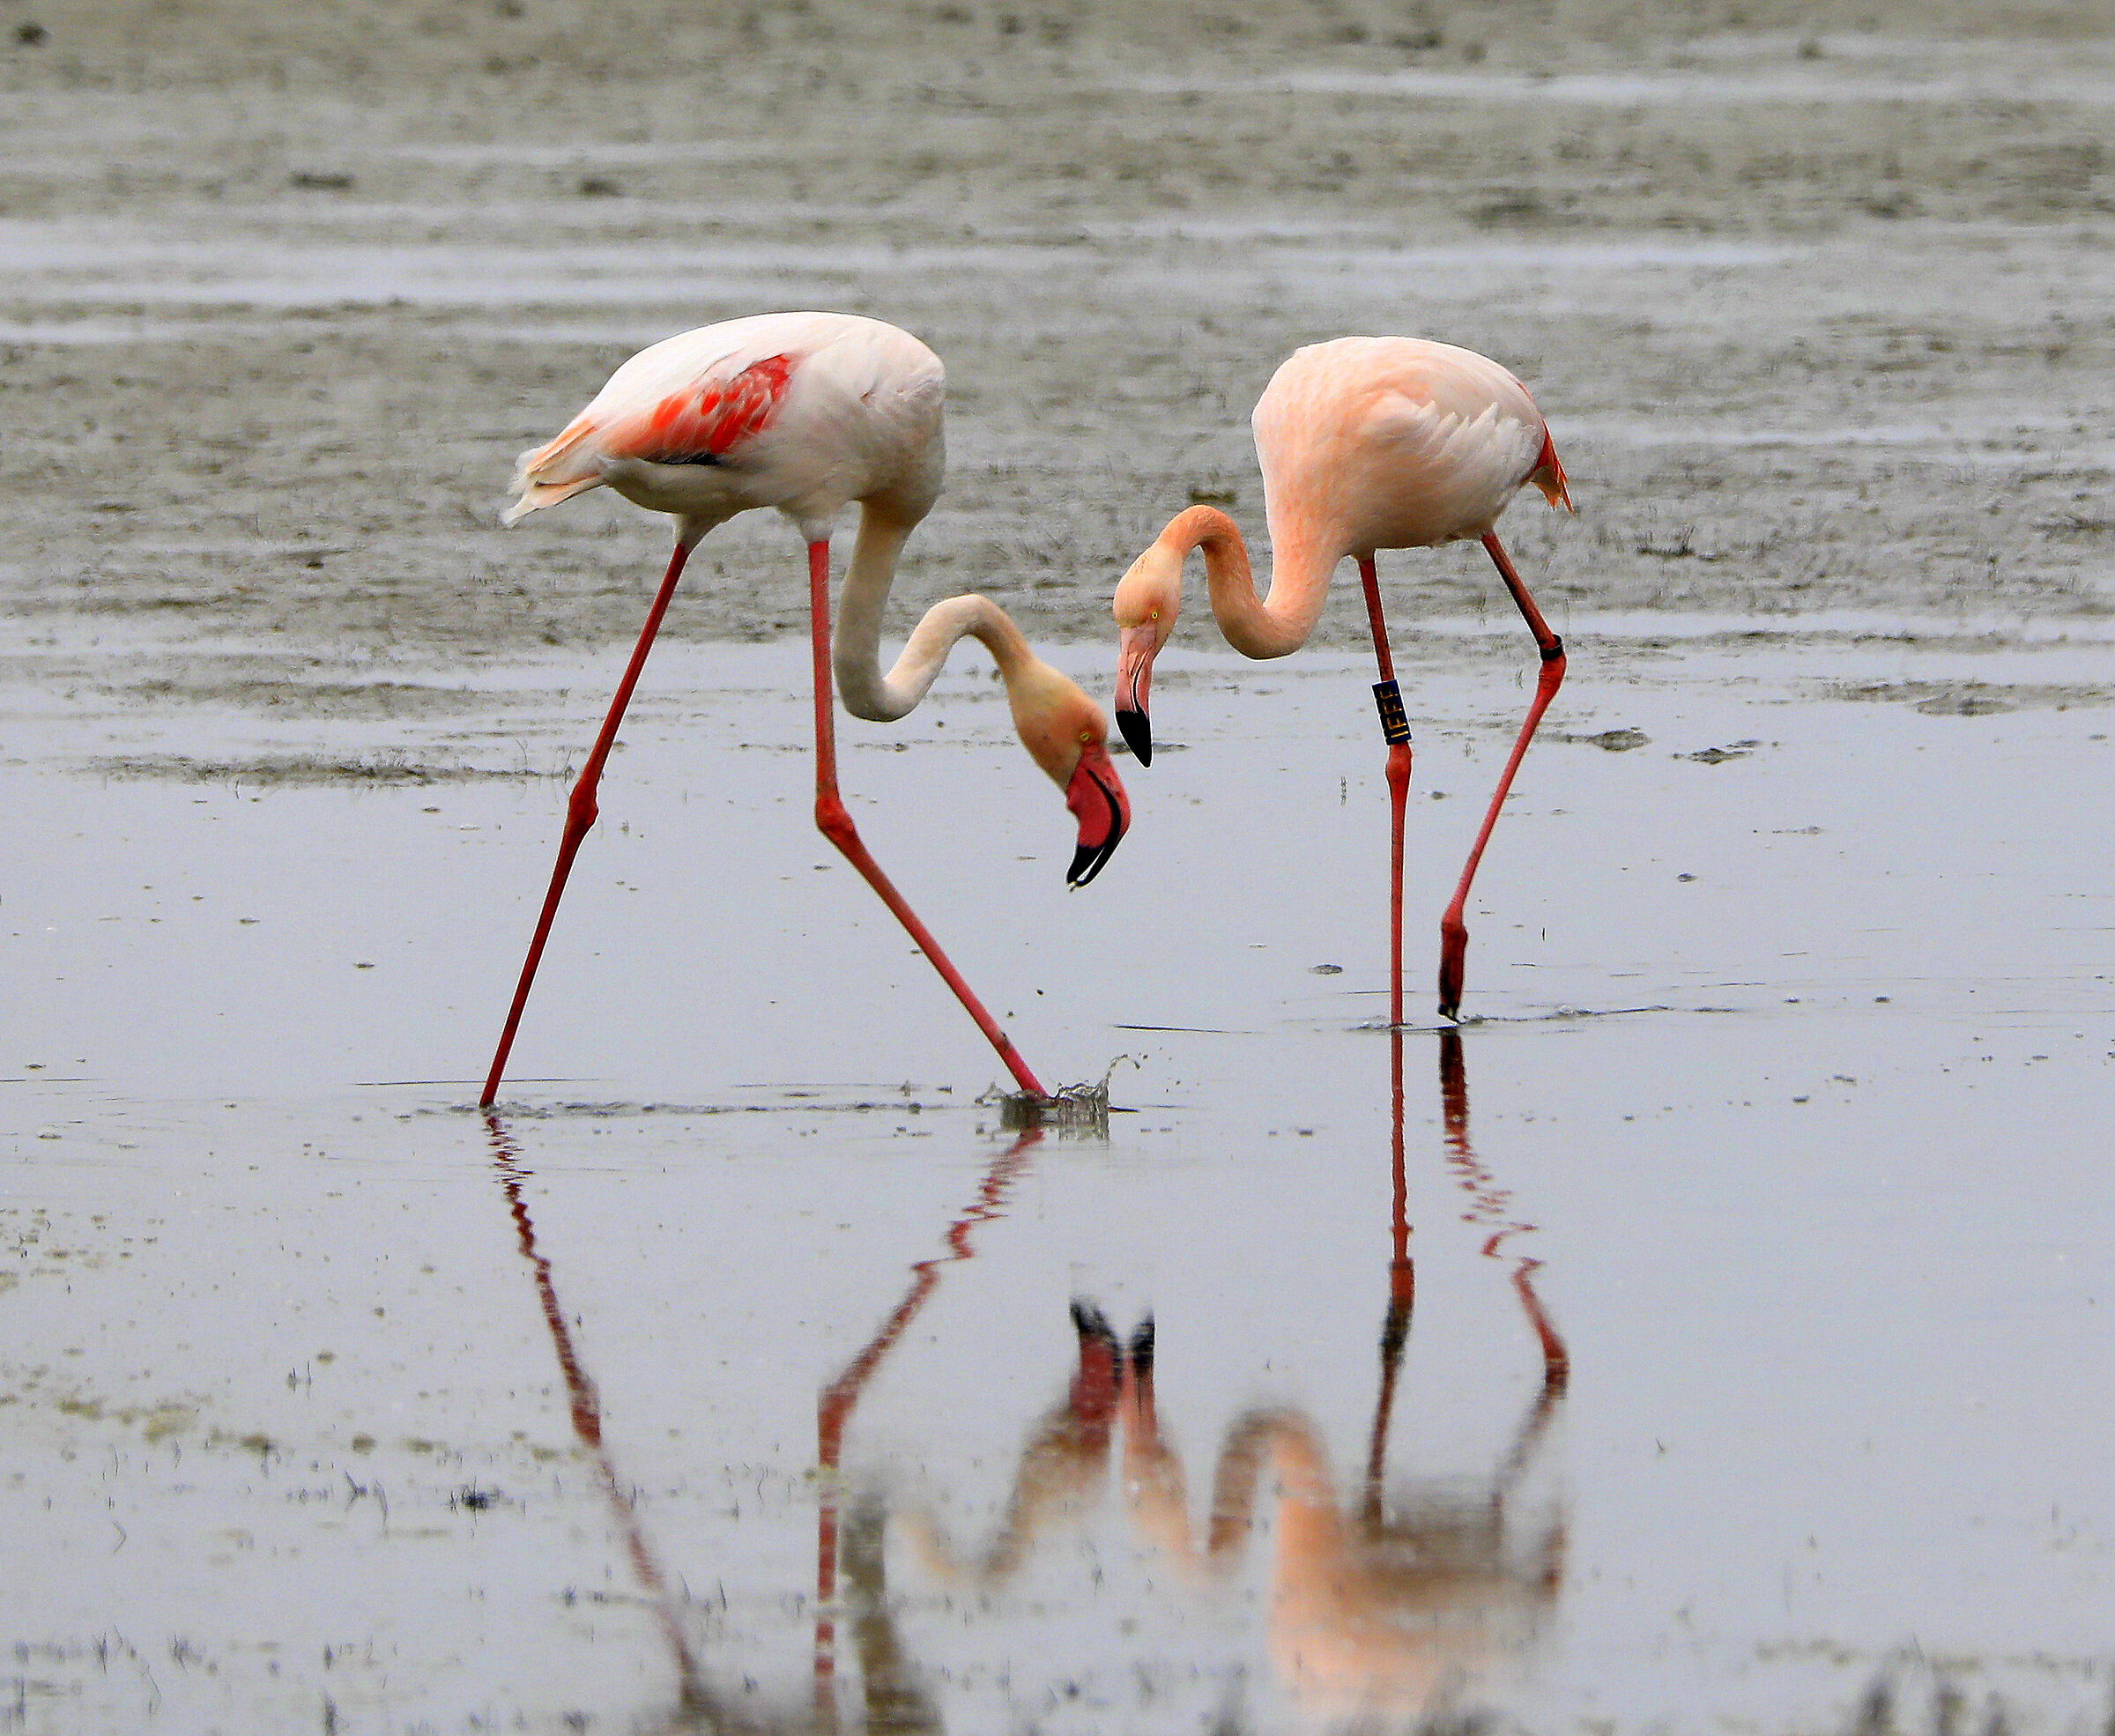 THE DANCE OF THE FLAMINGOS...